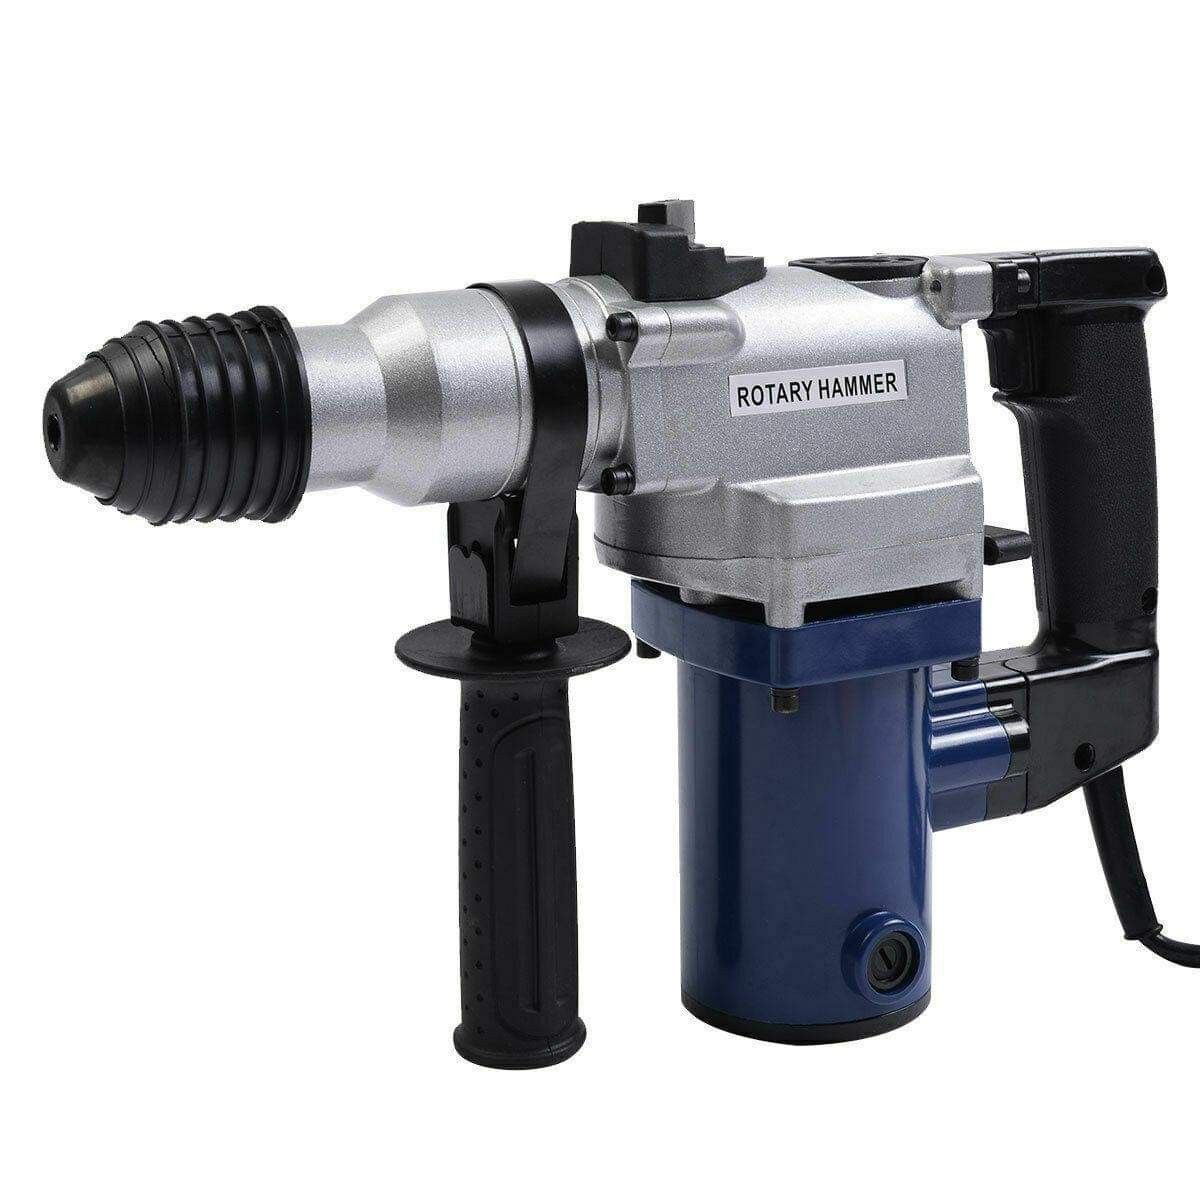 NEW Electric Rotary Hammer Drill for Home Use